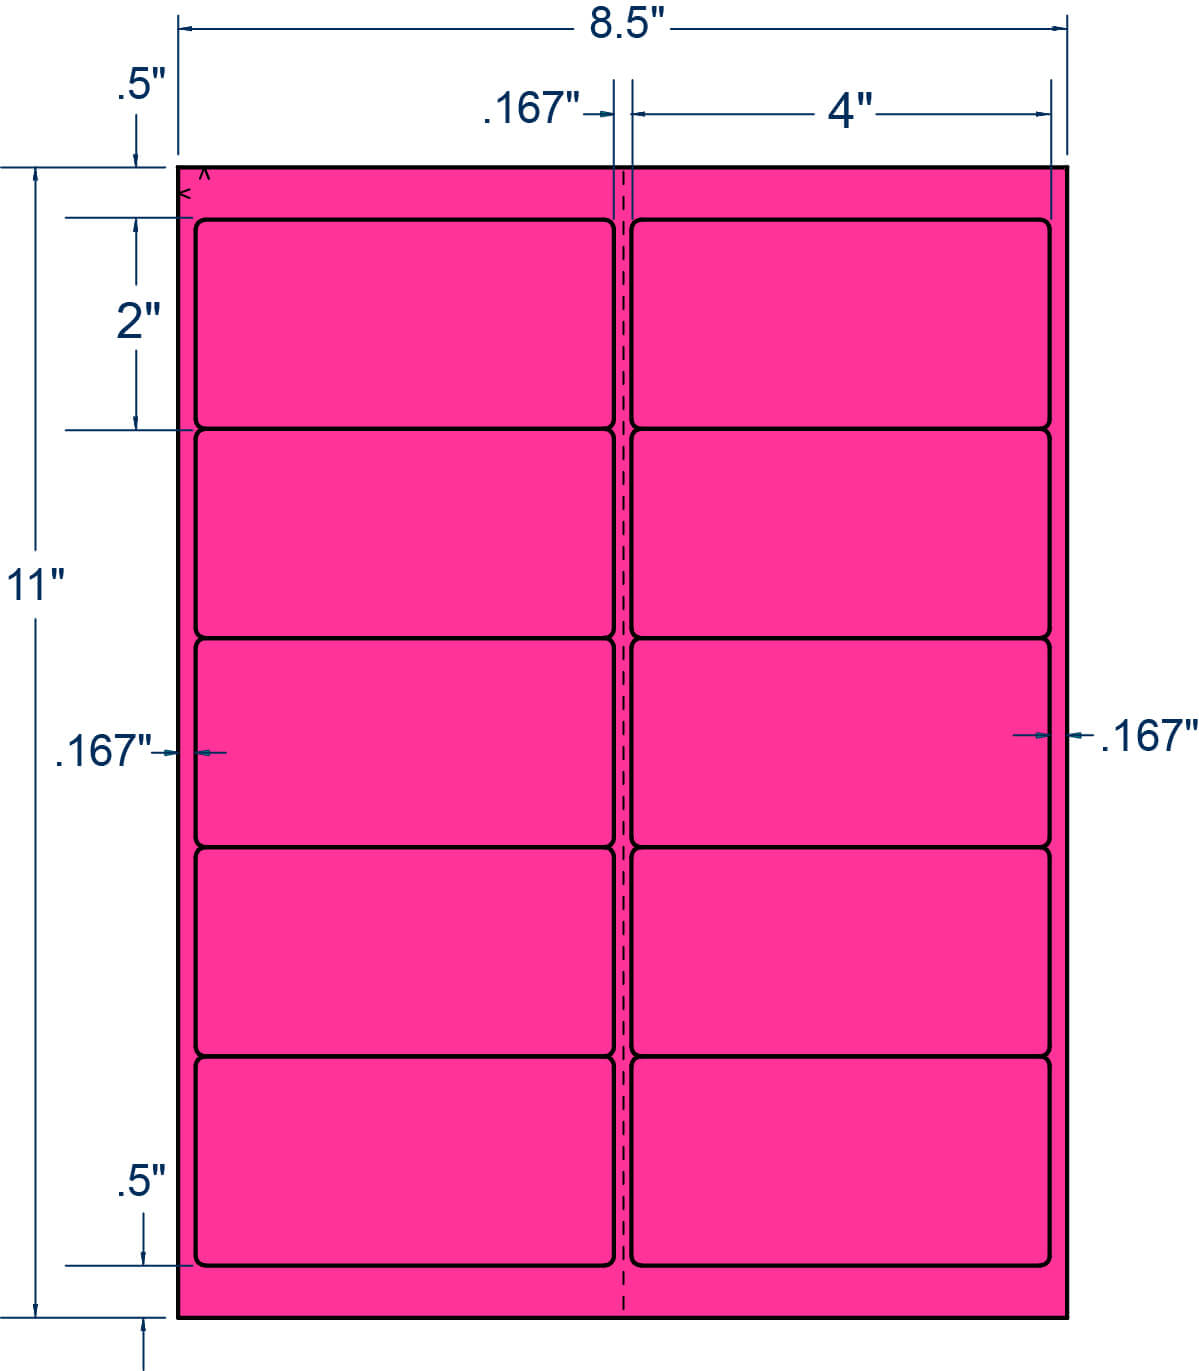 4" x 2" 312164 1,000 Neon Fluorescent Pink Address Labels Stand Out 